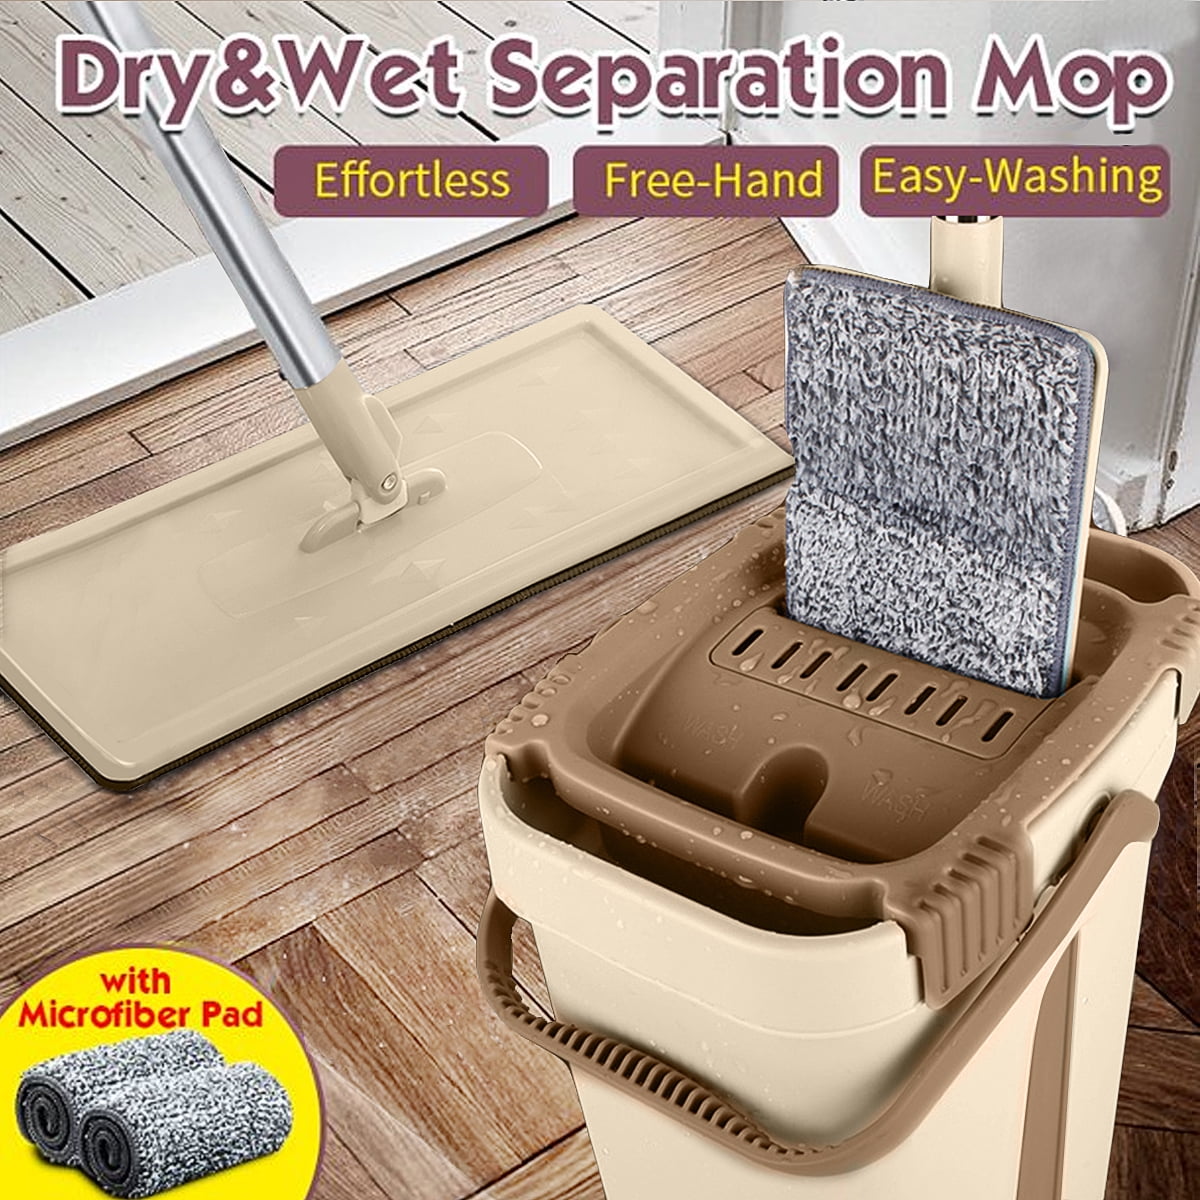 2 Mops Self Cleaning Mop Bucket System Drying Wringing  Flat Floor Microfiber US 